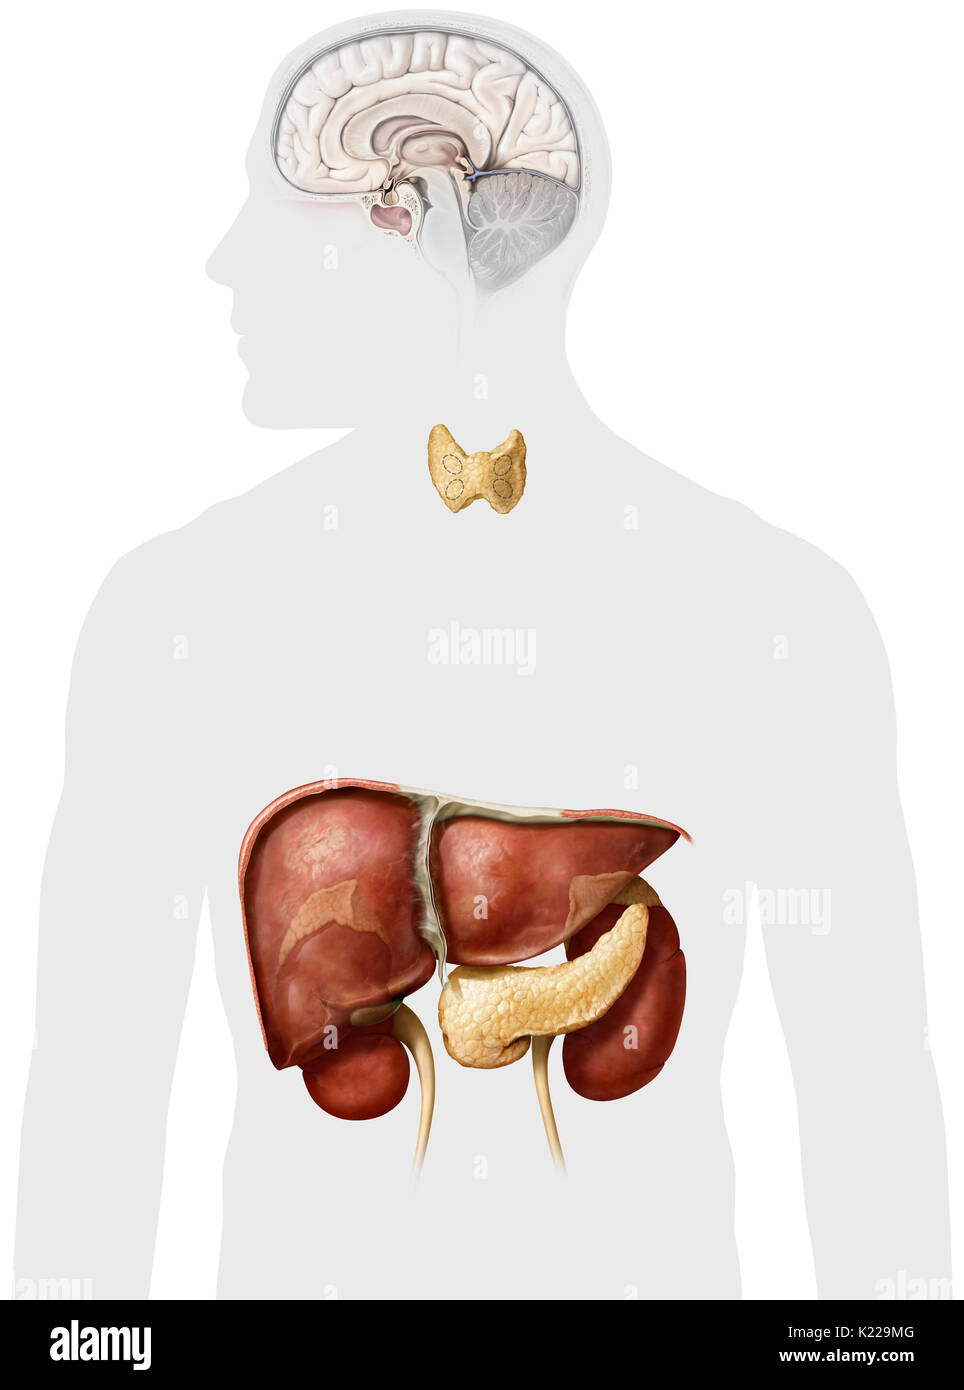 This image shows the glands and the organs of the endocrine system. Stock Photo